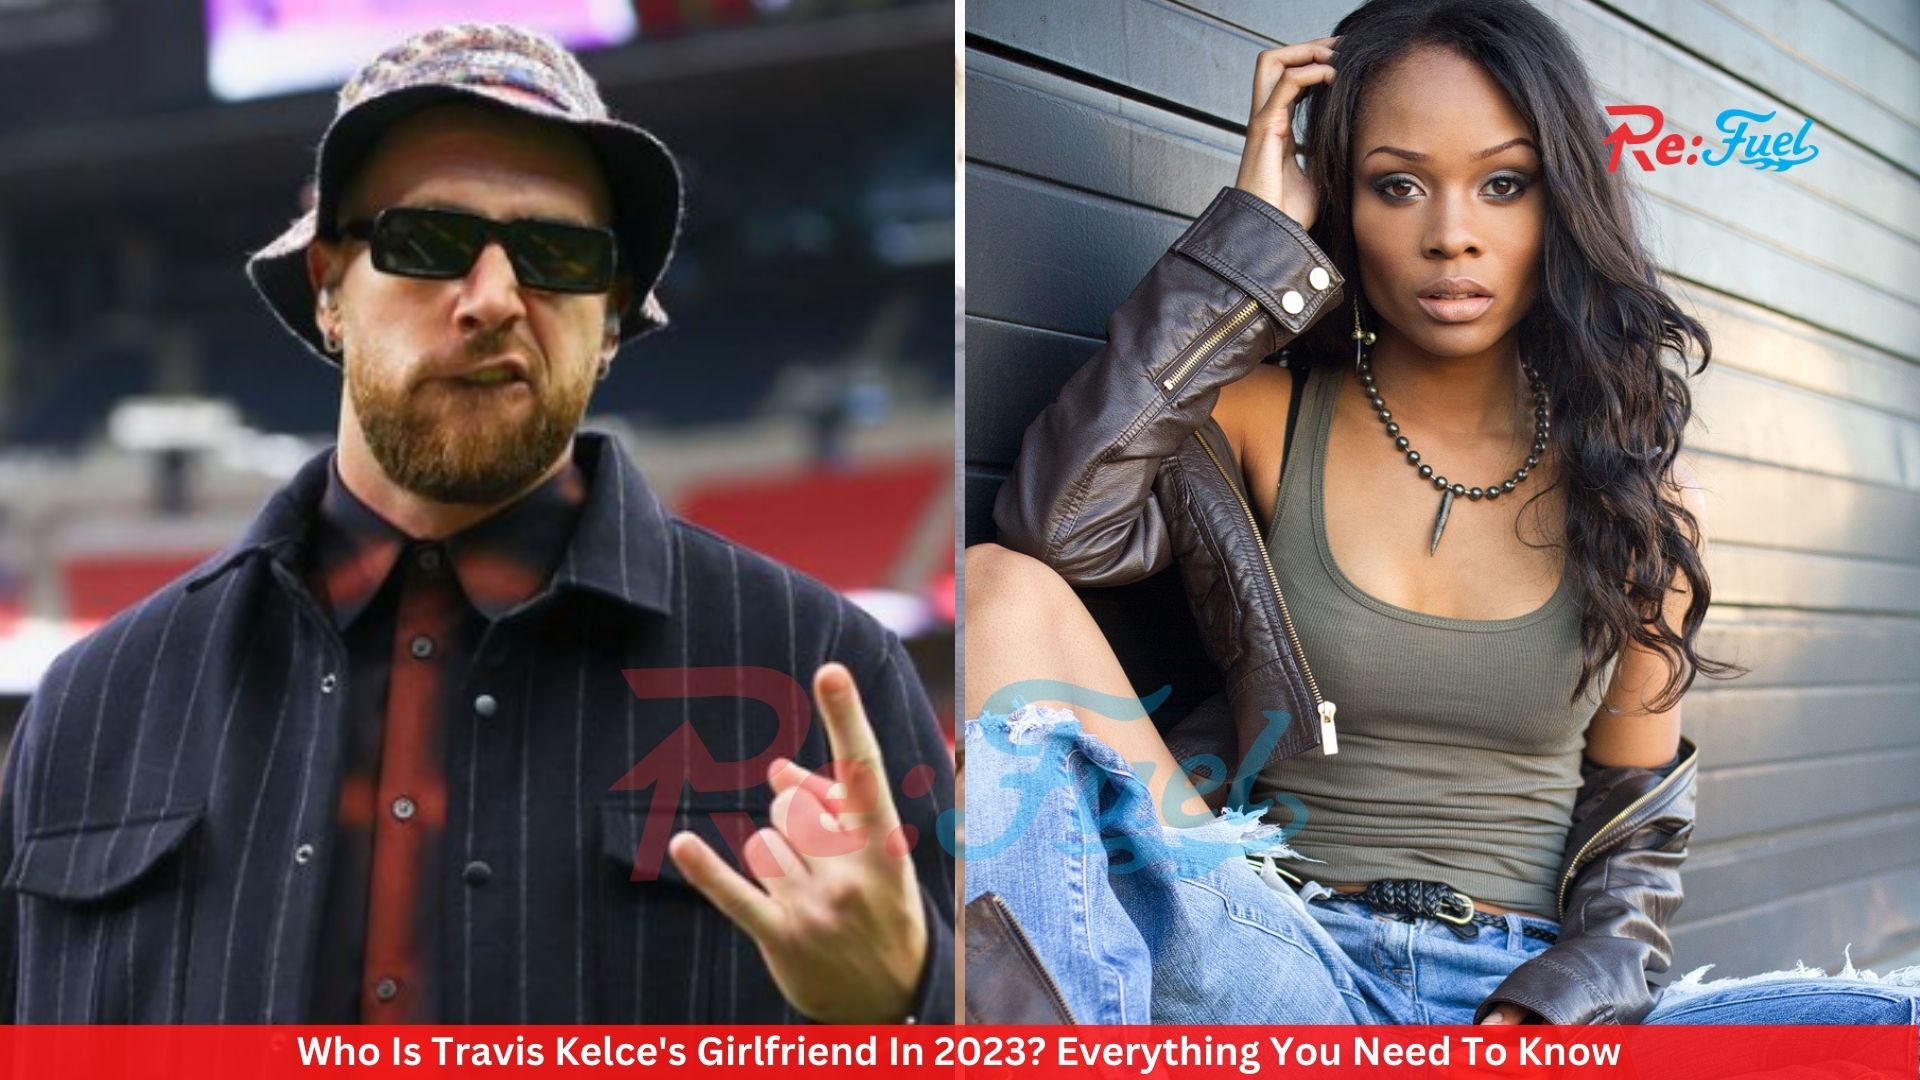 Who Is Travis Kelce's Girlfriend In 2023? Everything You Need To Know